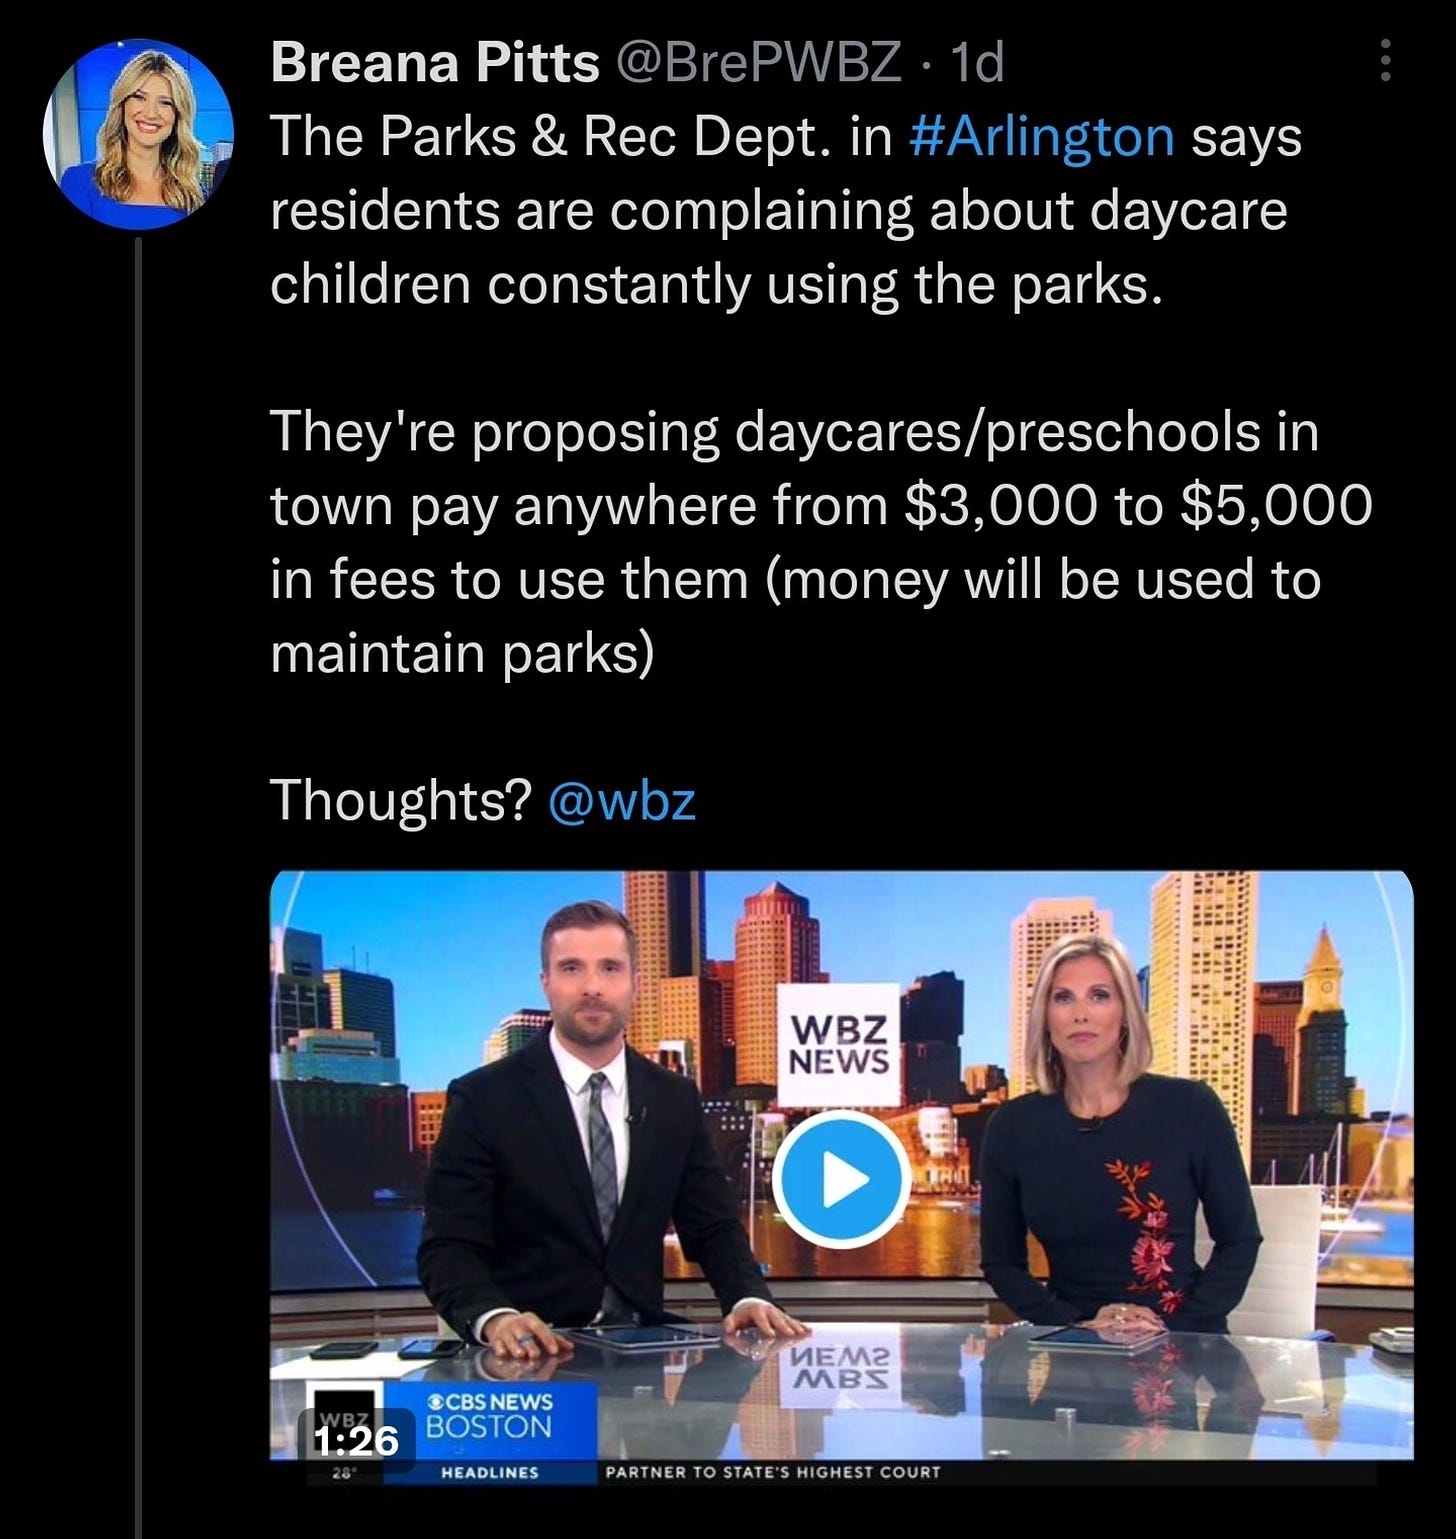 The Parks and Rec Department in Arlington says residents are complaining that daycare children are constantly using the parks. They're proposing daycares/preschools in town pay anywhere from $3000 to $5000 in fees to use them (money will be used to maintain parks). Thoughts? @wbz